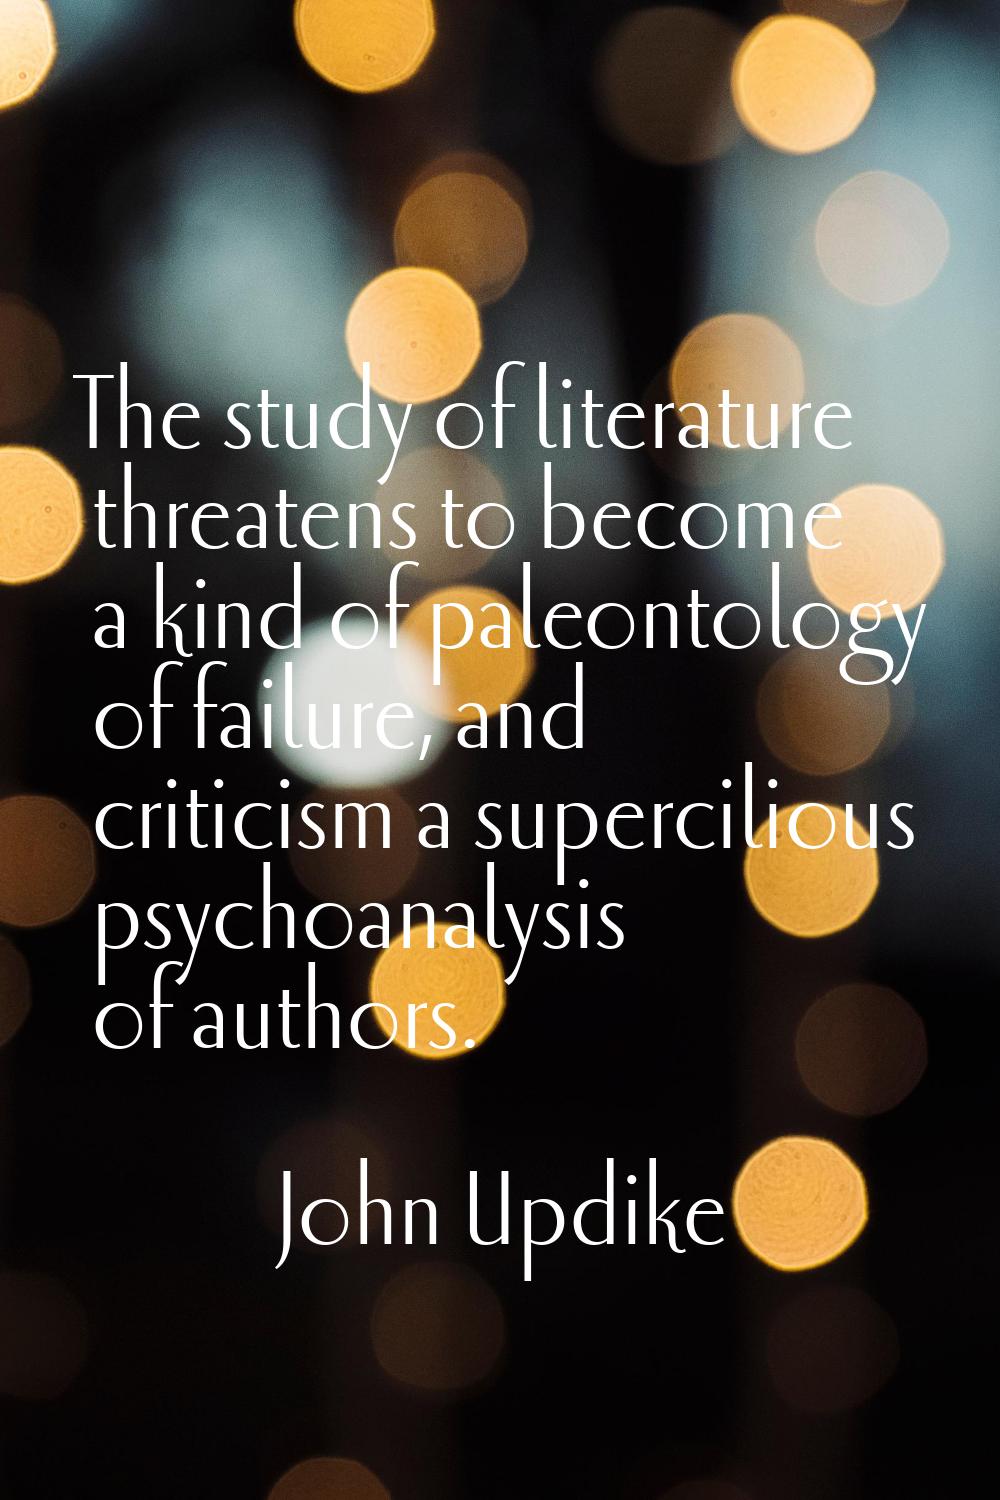 The study of literature threatens to become a kind of paleontology of failure, and criticism a supe